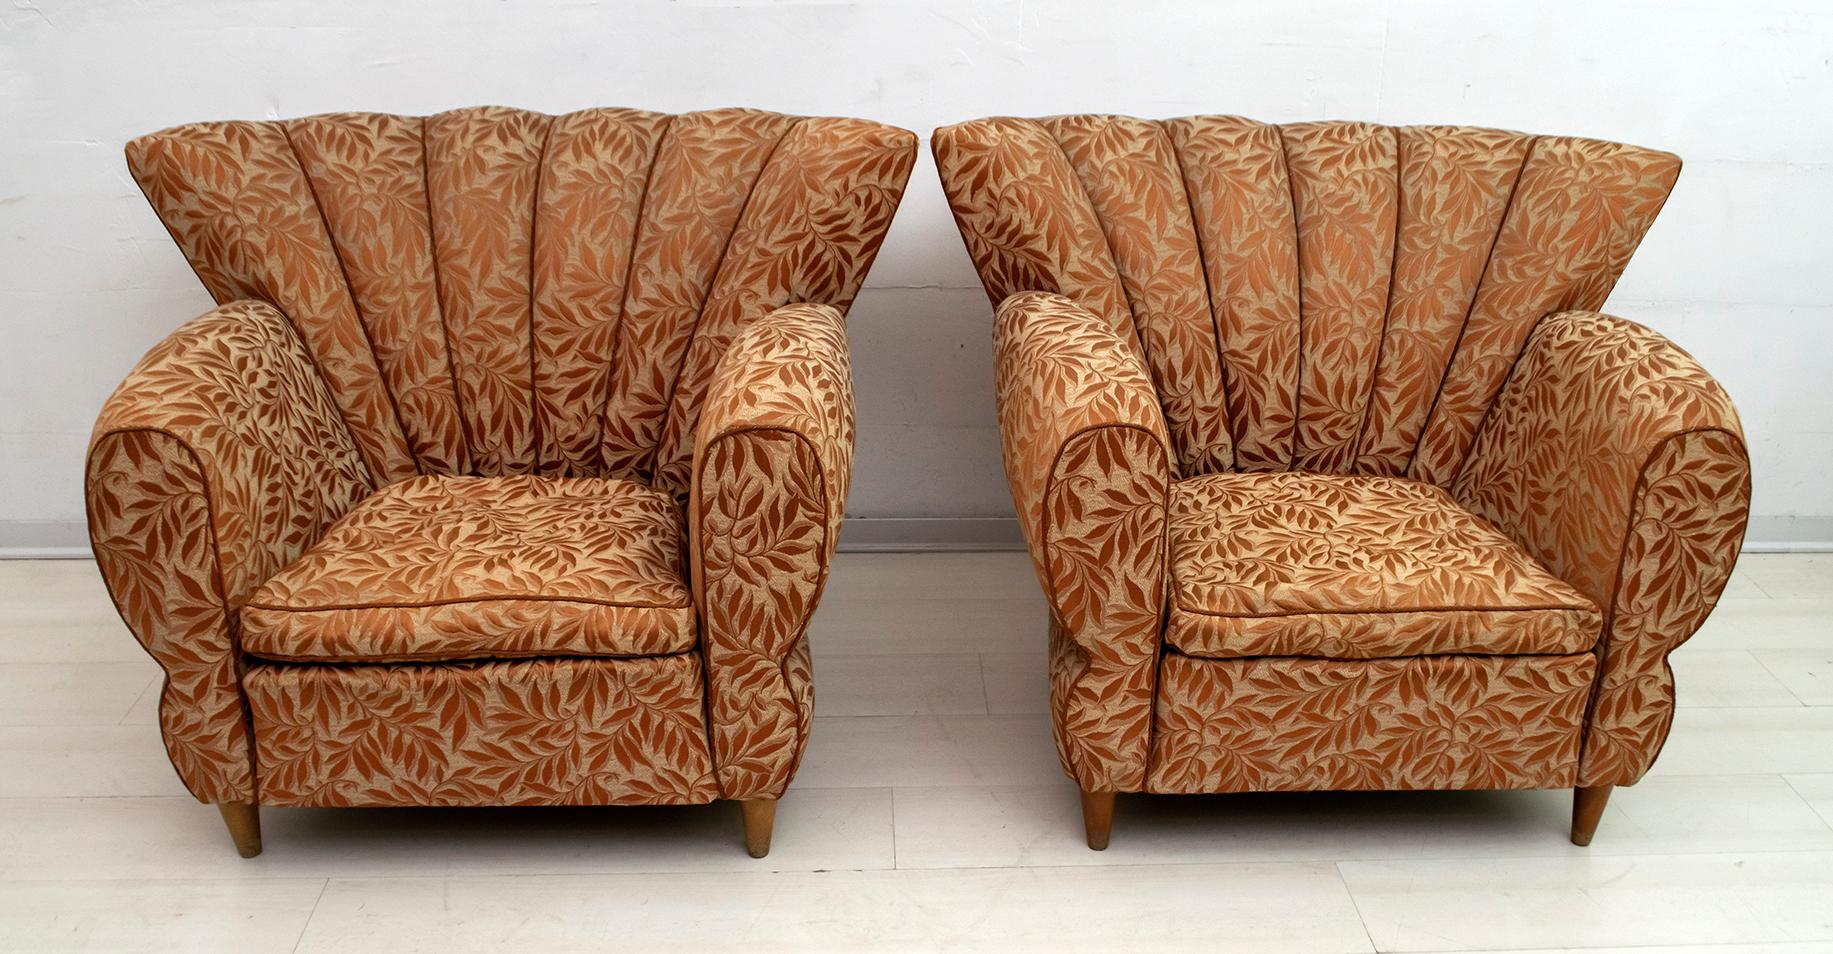 Particular pair of armchairs attributed to the famous architect Guglielmo Ulrich, the upholstery is original from the time but replacement is recommended. Production from the 1940s in Art Deco style.

 